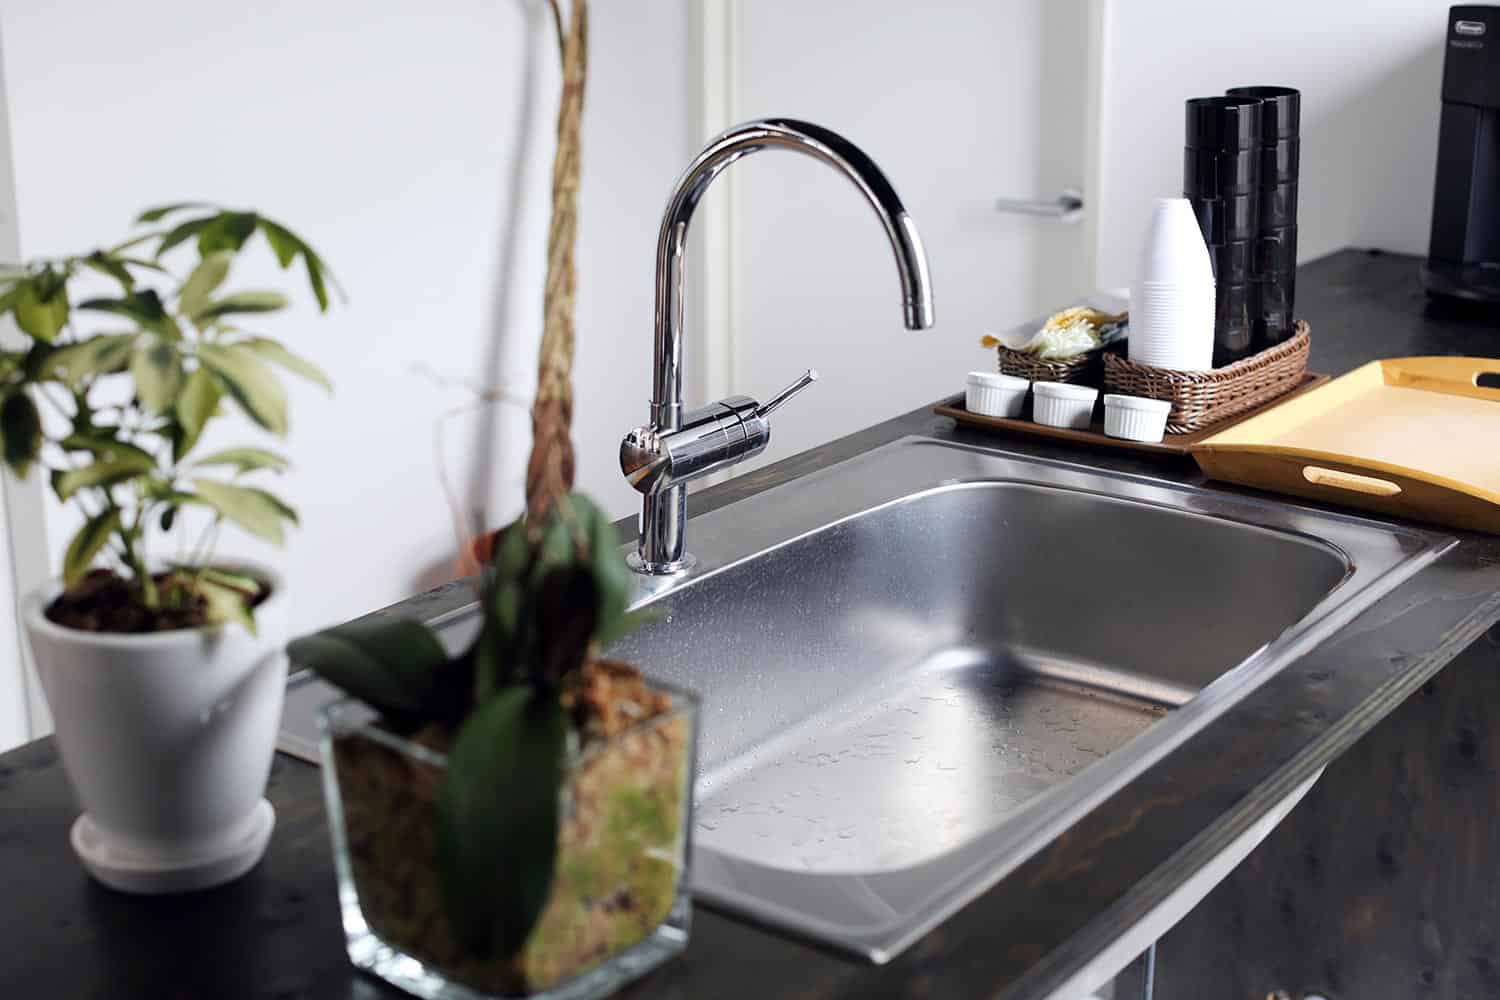 The sink which was installed in the office